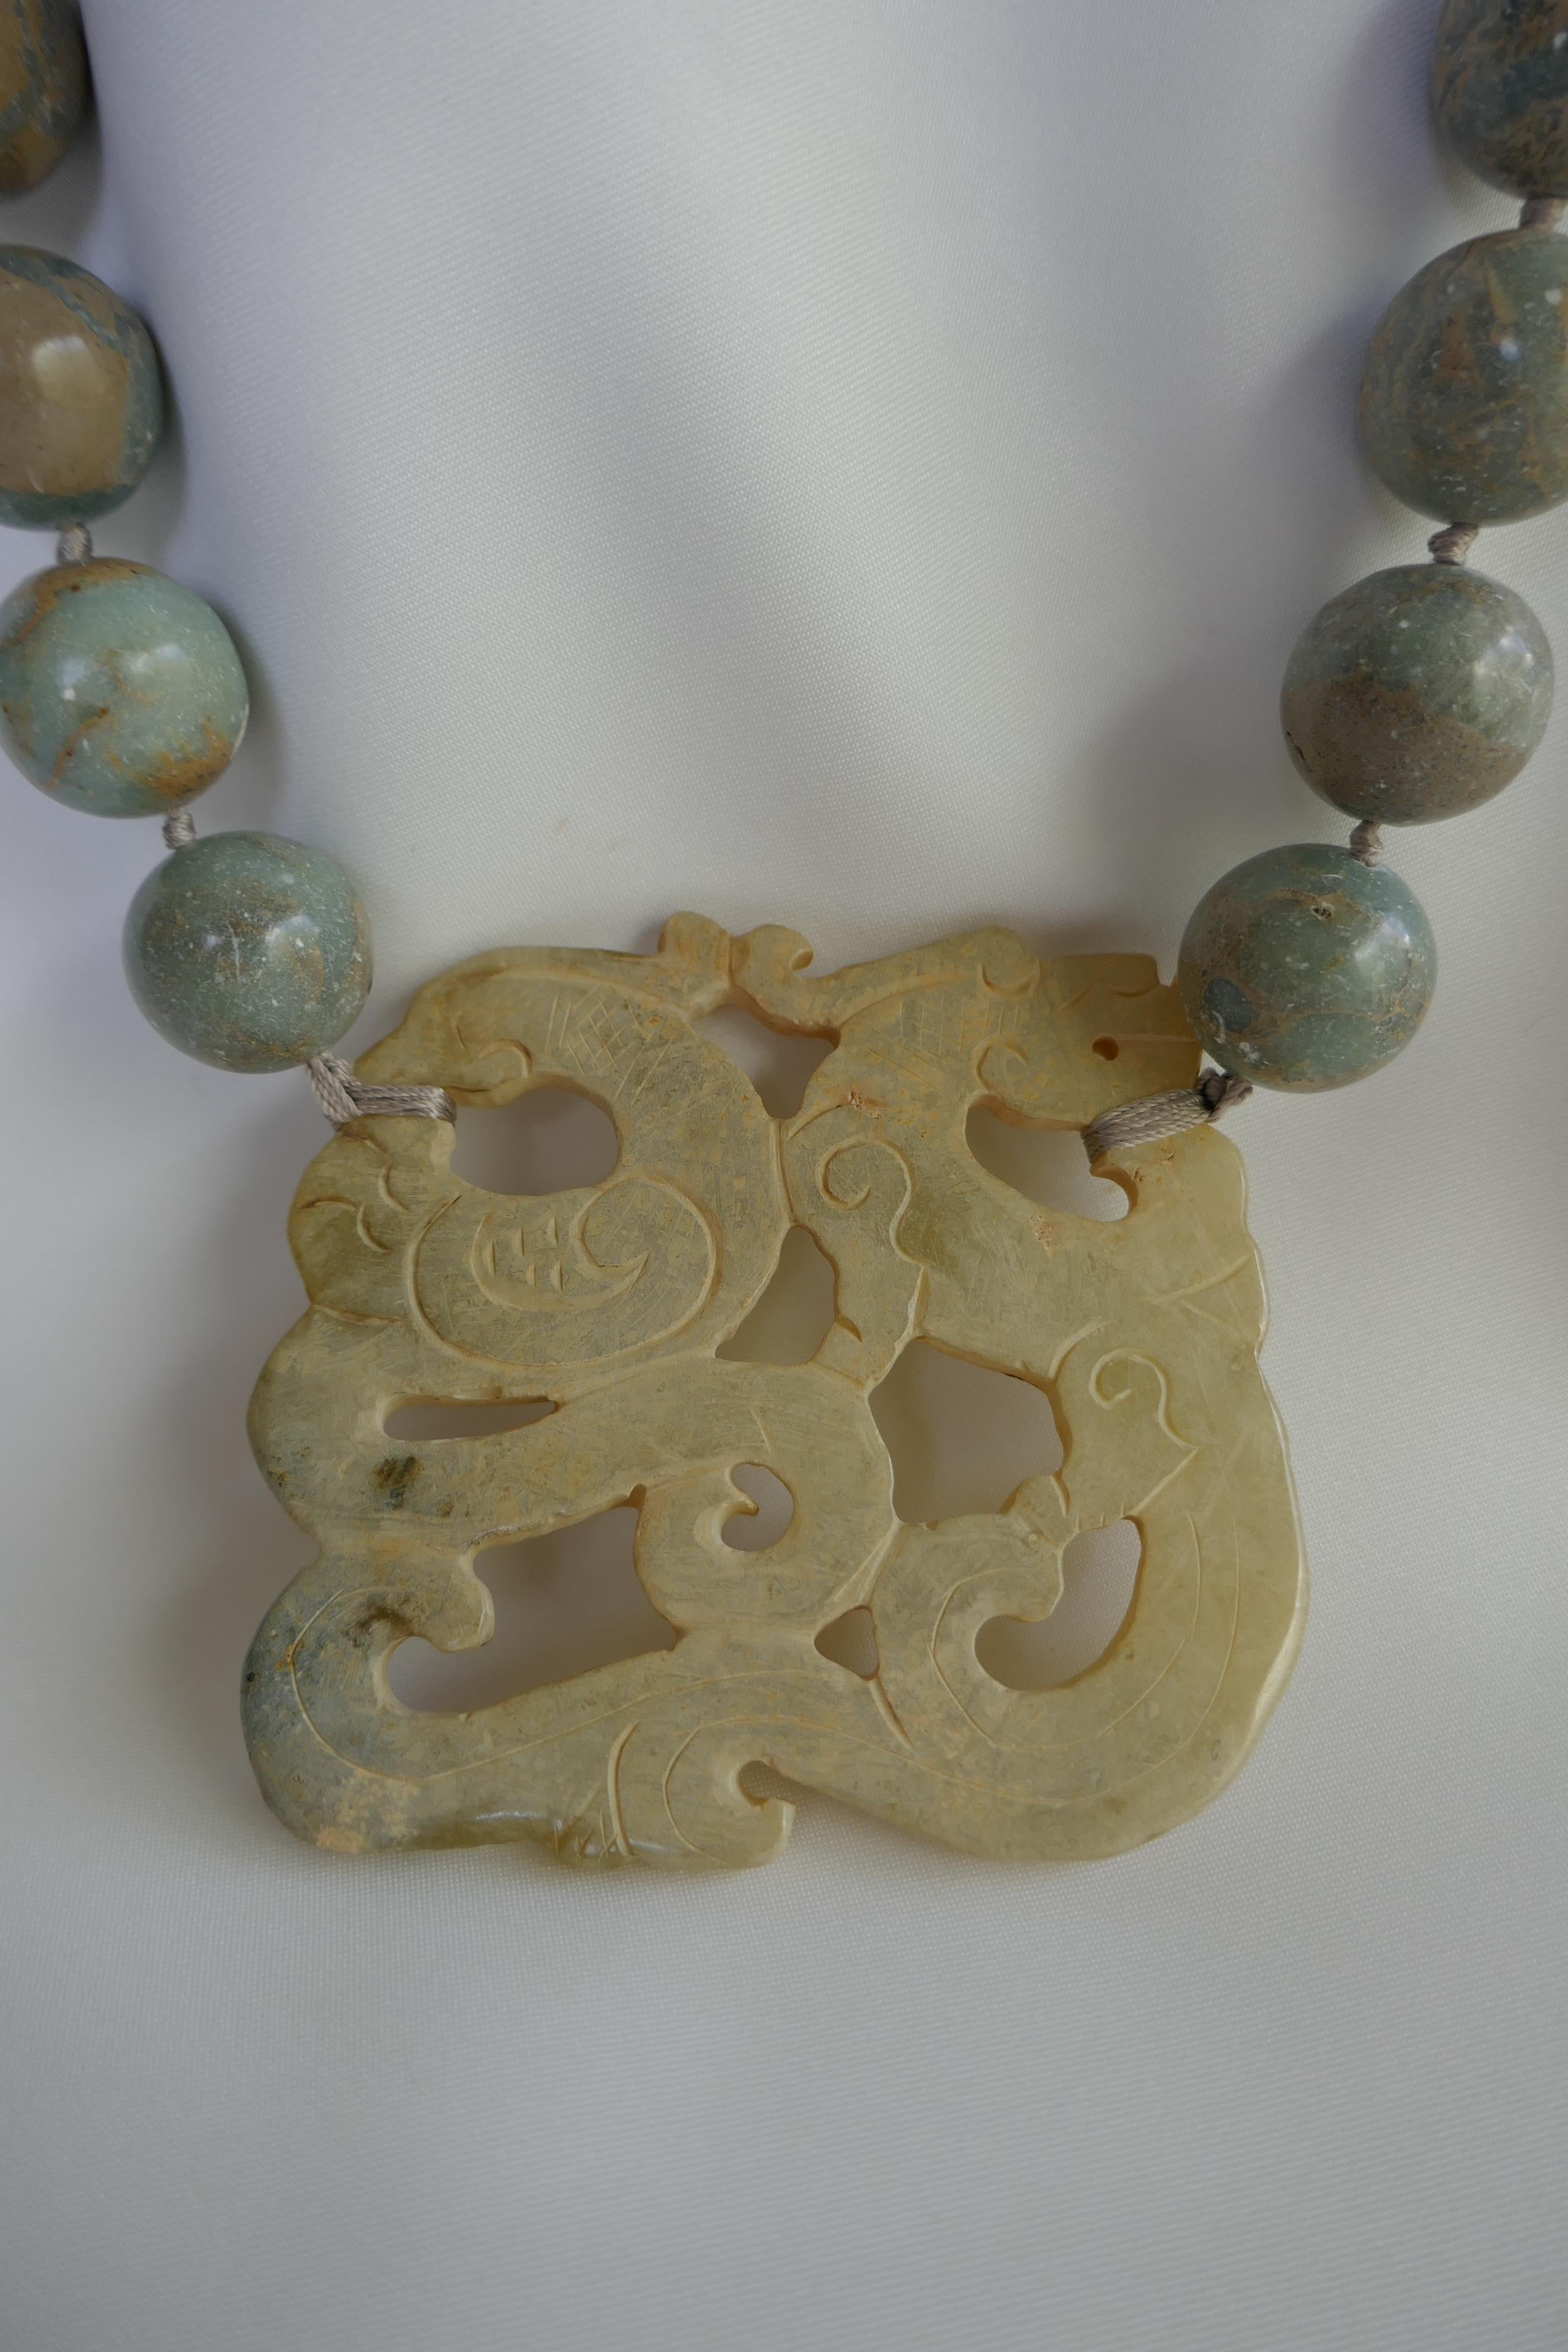 A statement necklace!!! This 20mm forest jasper (stone tonality: beiges sage greens) necklace has a carved milky white agate dragon piece with a 925 oxidized sterling silver clasp.  The necklace is 25 1/2 inches long.   It is strung on beige silk